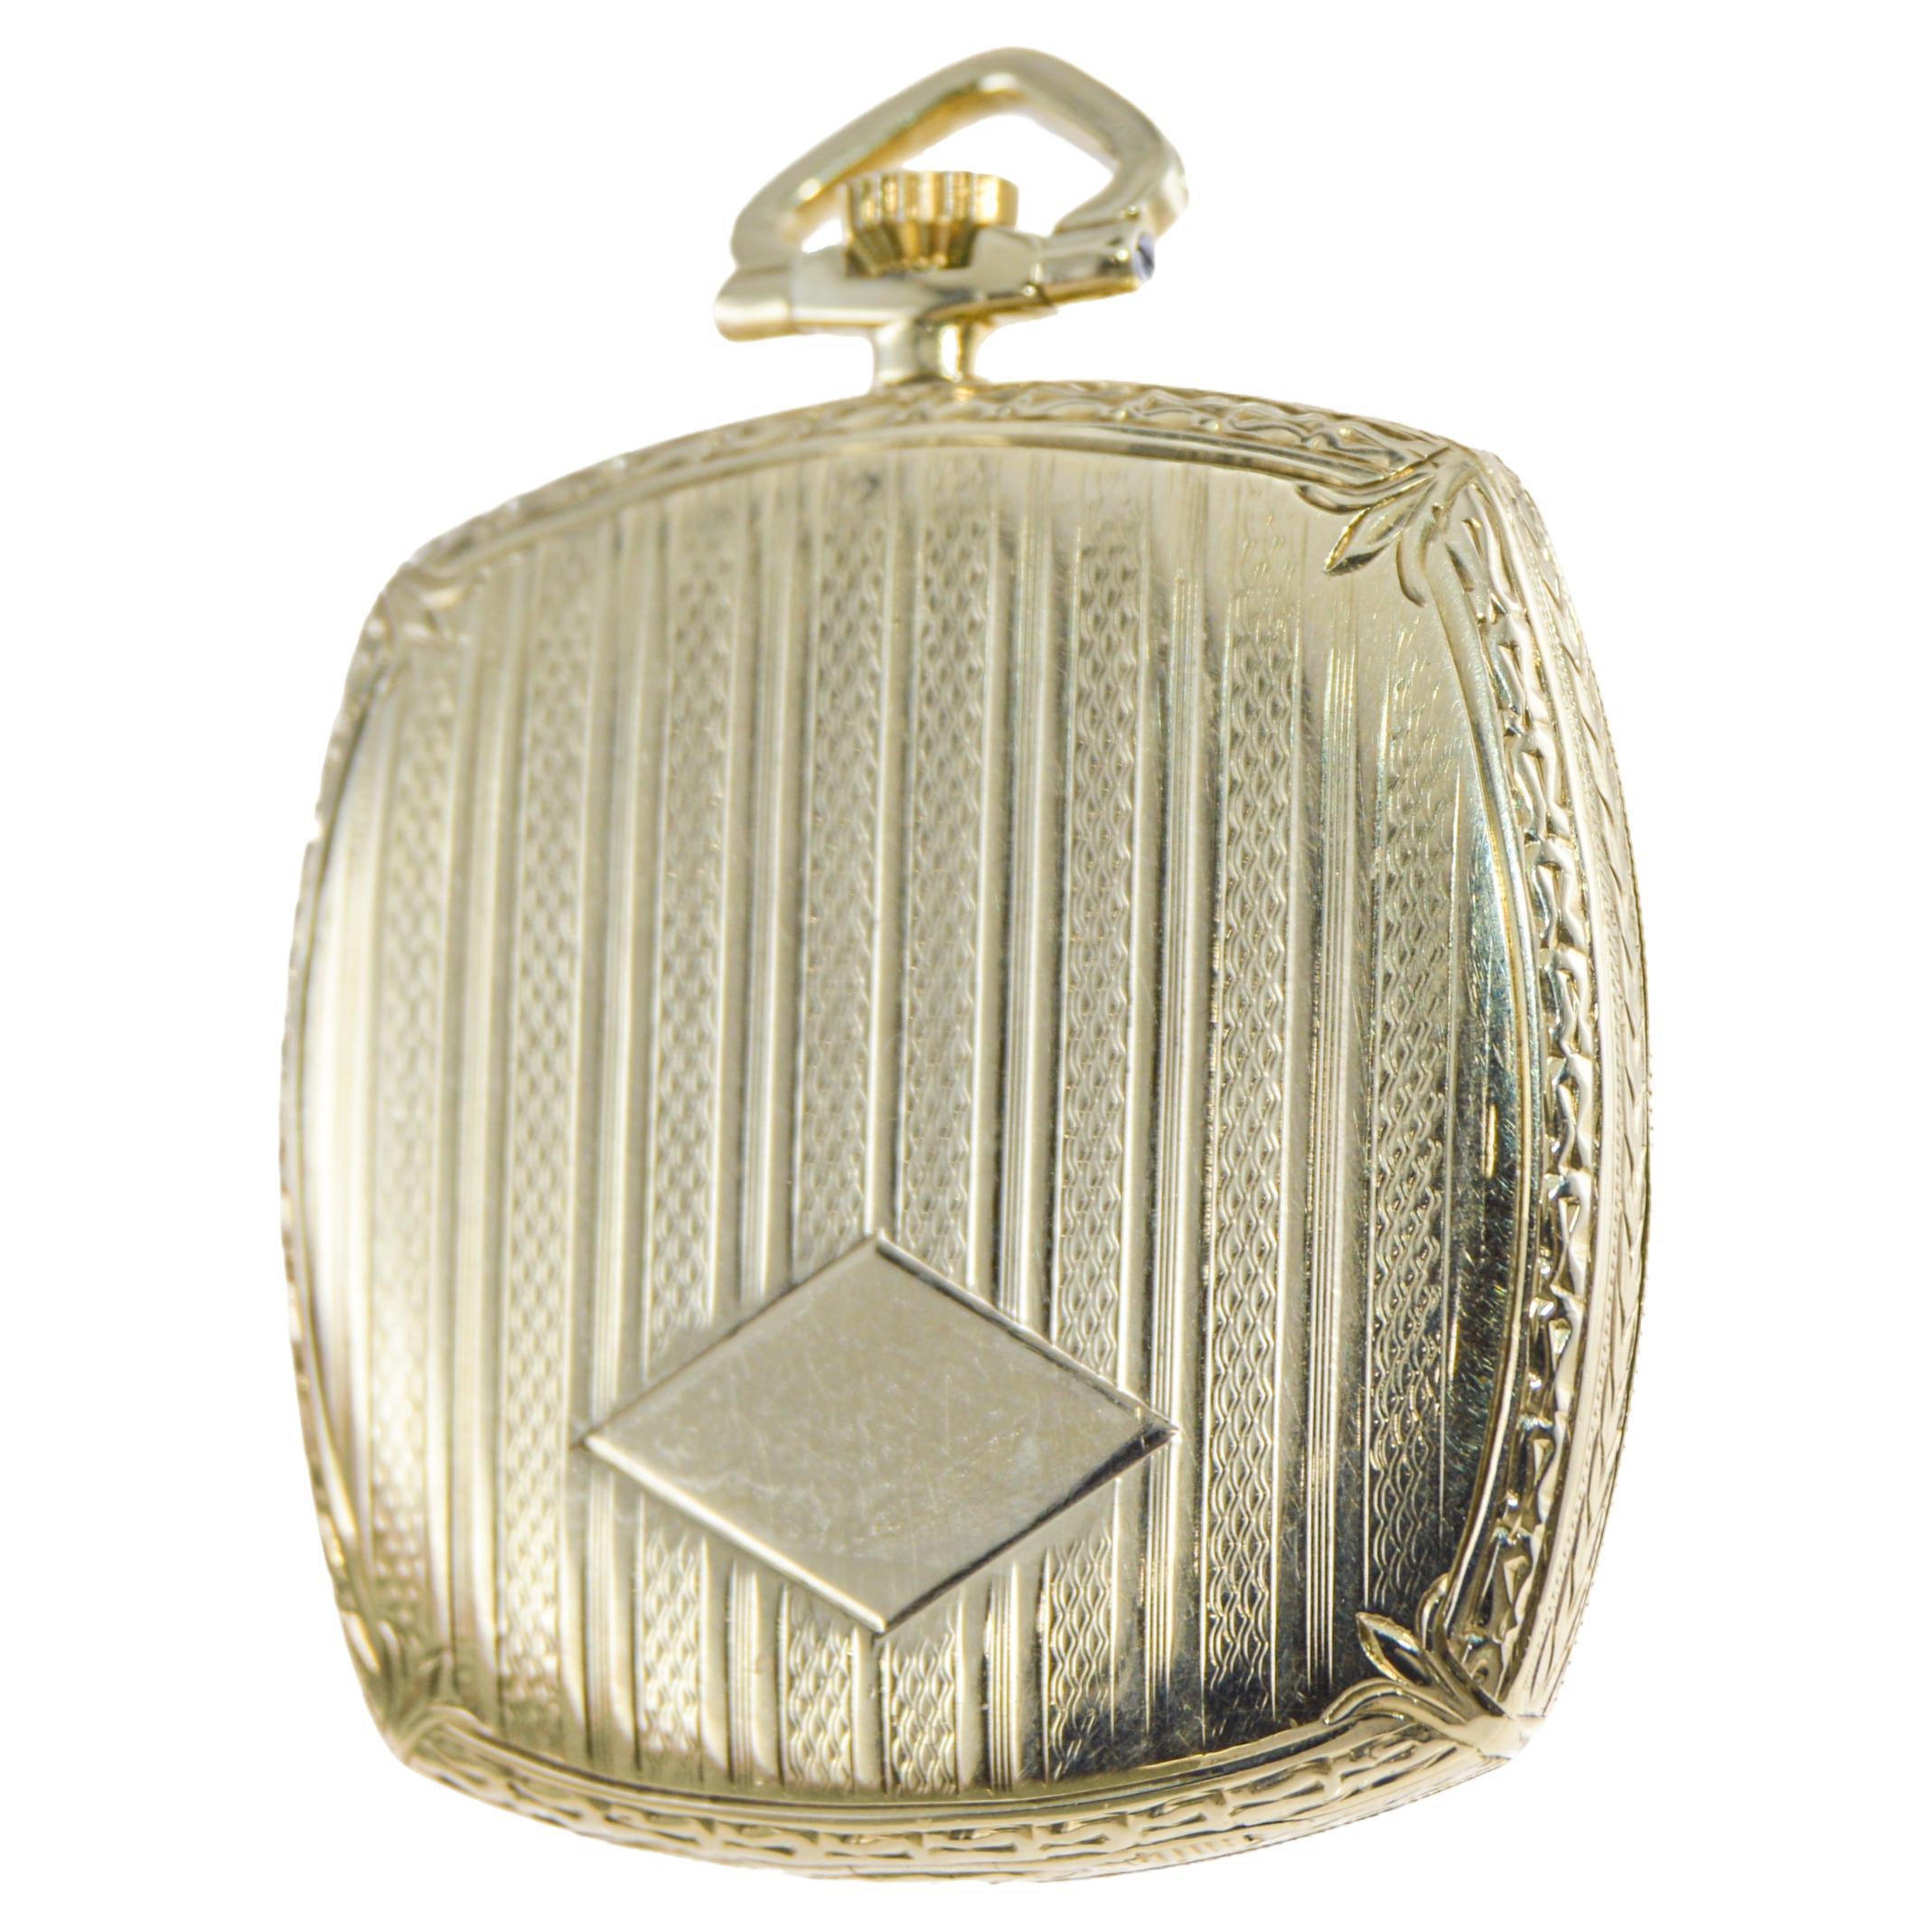 Black Starr & Frost 14 Karat Gold Art Deco Pocket Watch with Engraved Dial  For Sale 7